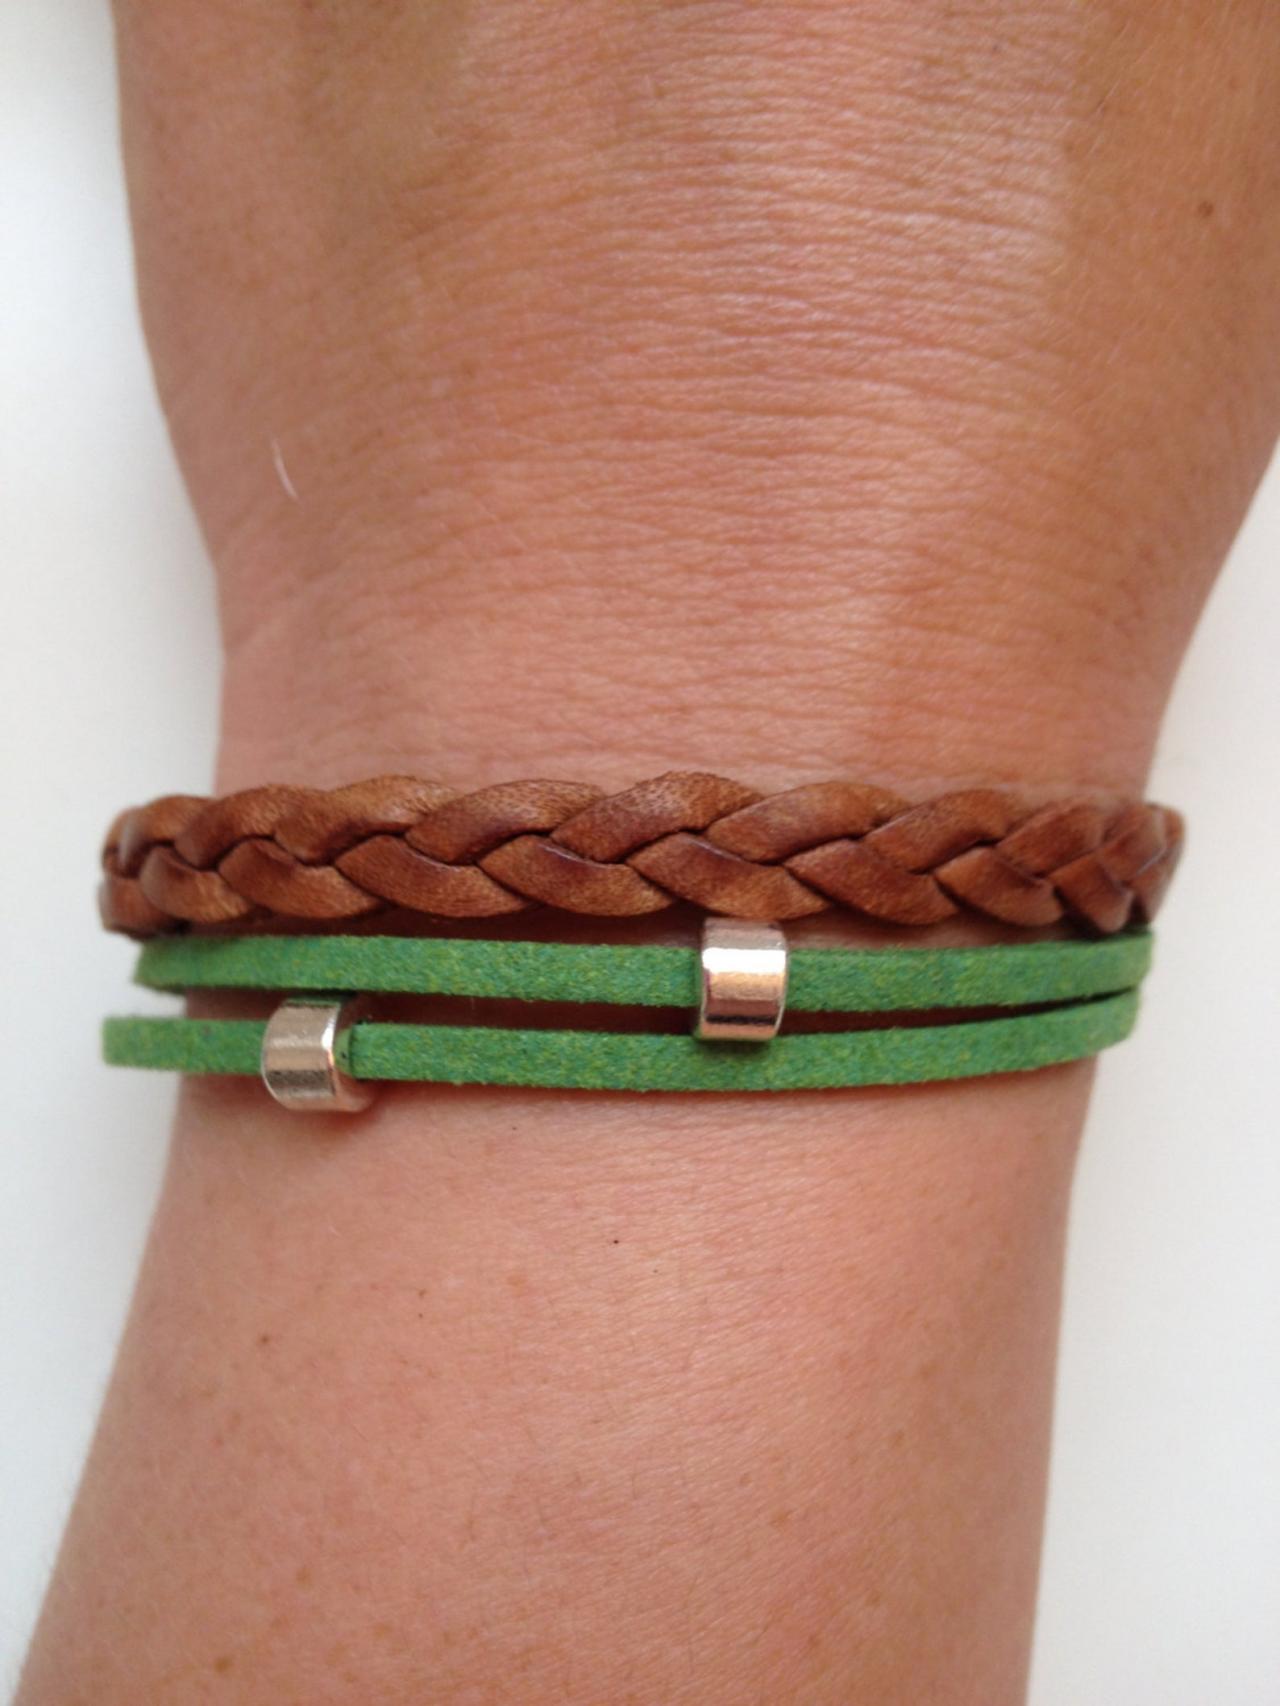 Leather Bracelet 30 - Friendship Cuff Ring Bracelet Brown Green Leather Braid Gift Adjustable Current Womenswear Unique Innovative